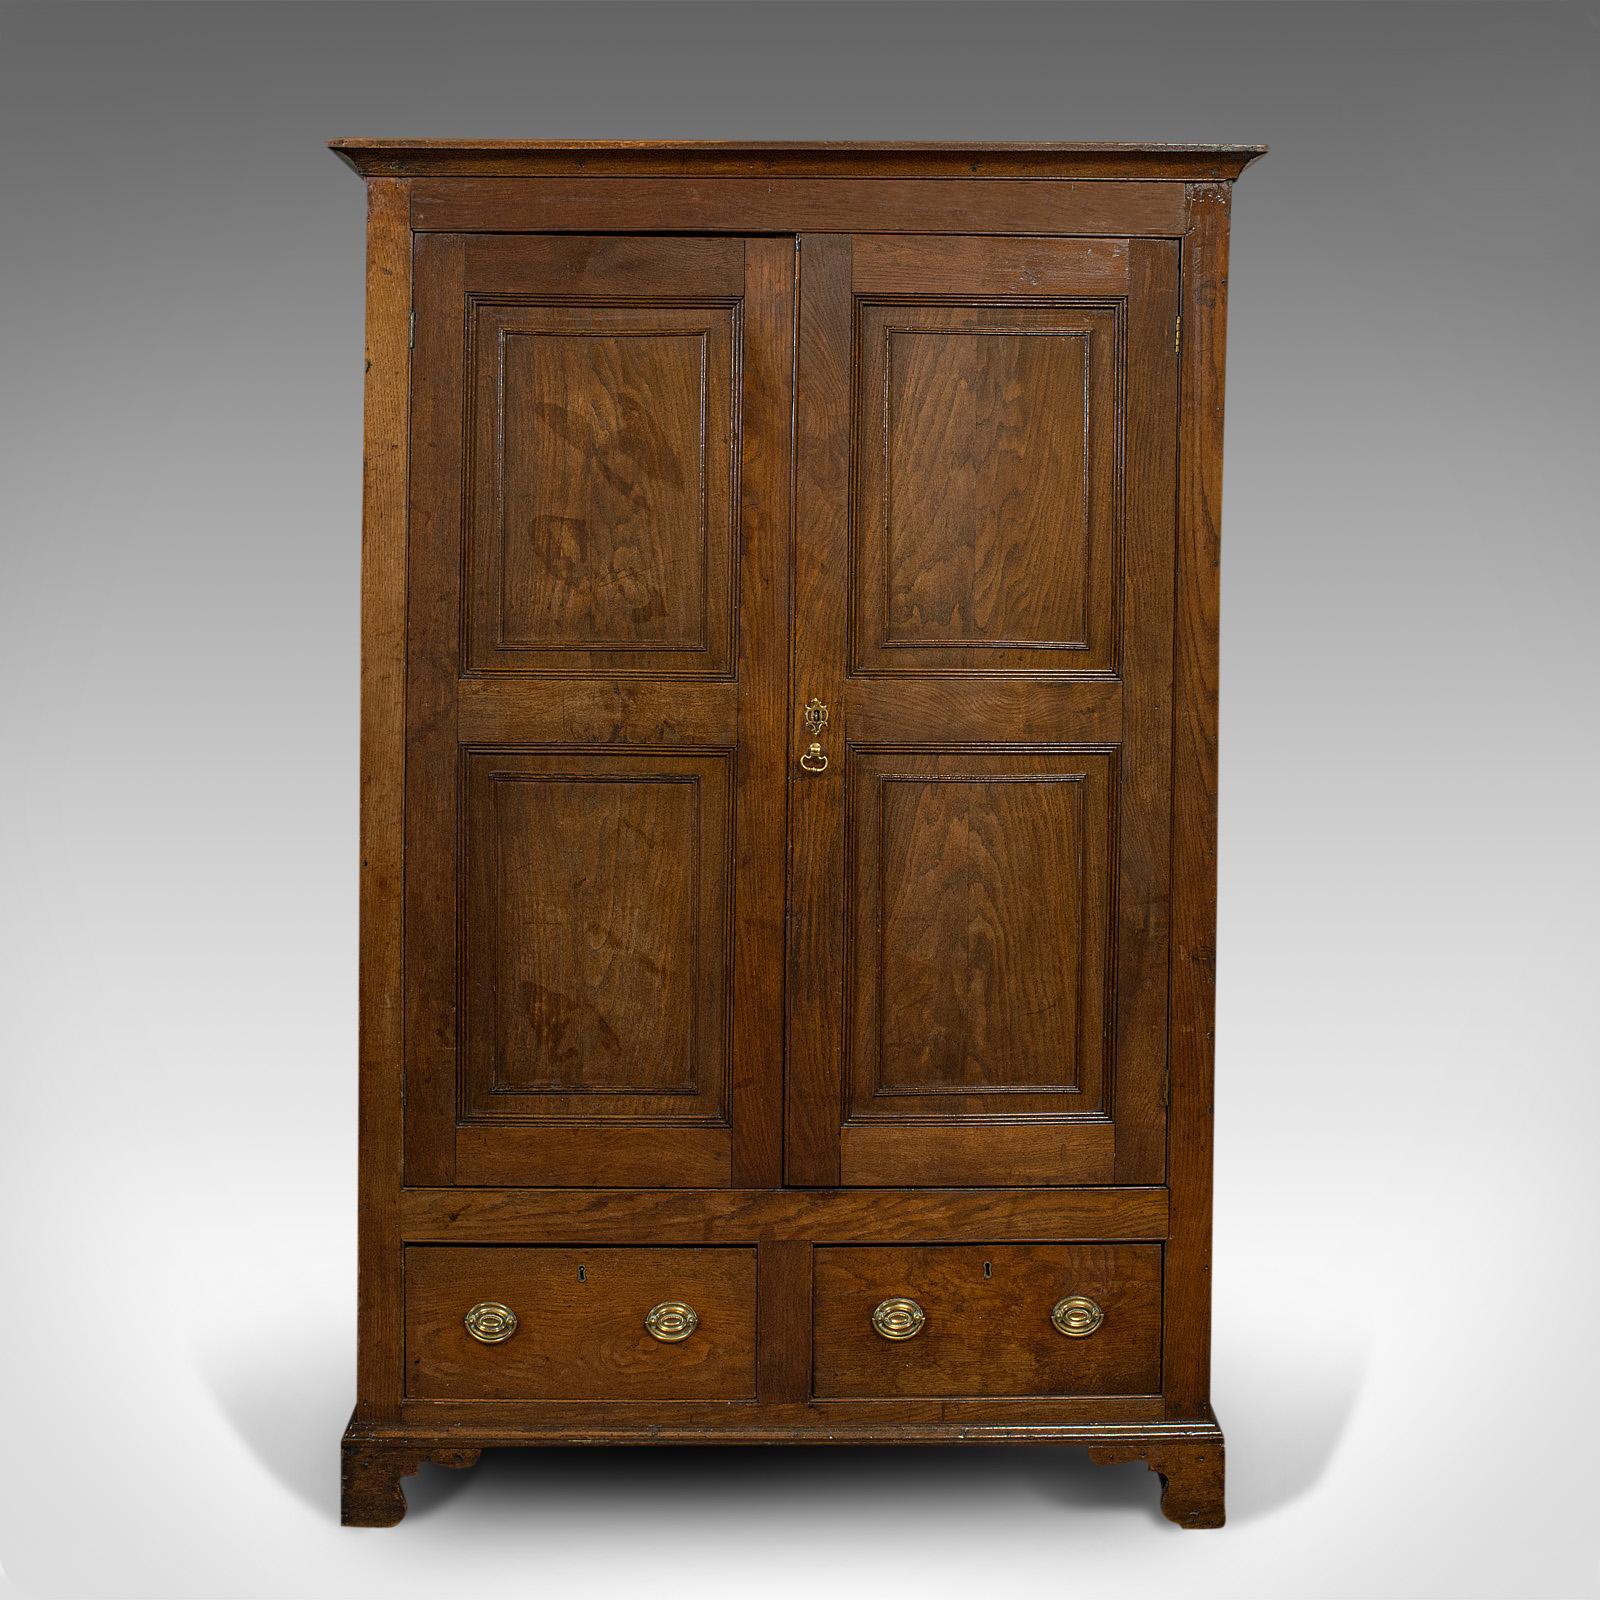 This is an antique wardrobe. An English, oak linen cabinet or press cupboard, dating to the Georgian period and later, circa 1800.

Grand proportion and coloration
Displays a desirable aged patina
Select oak shows fine grain interest and wisps